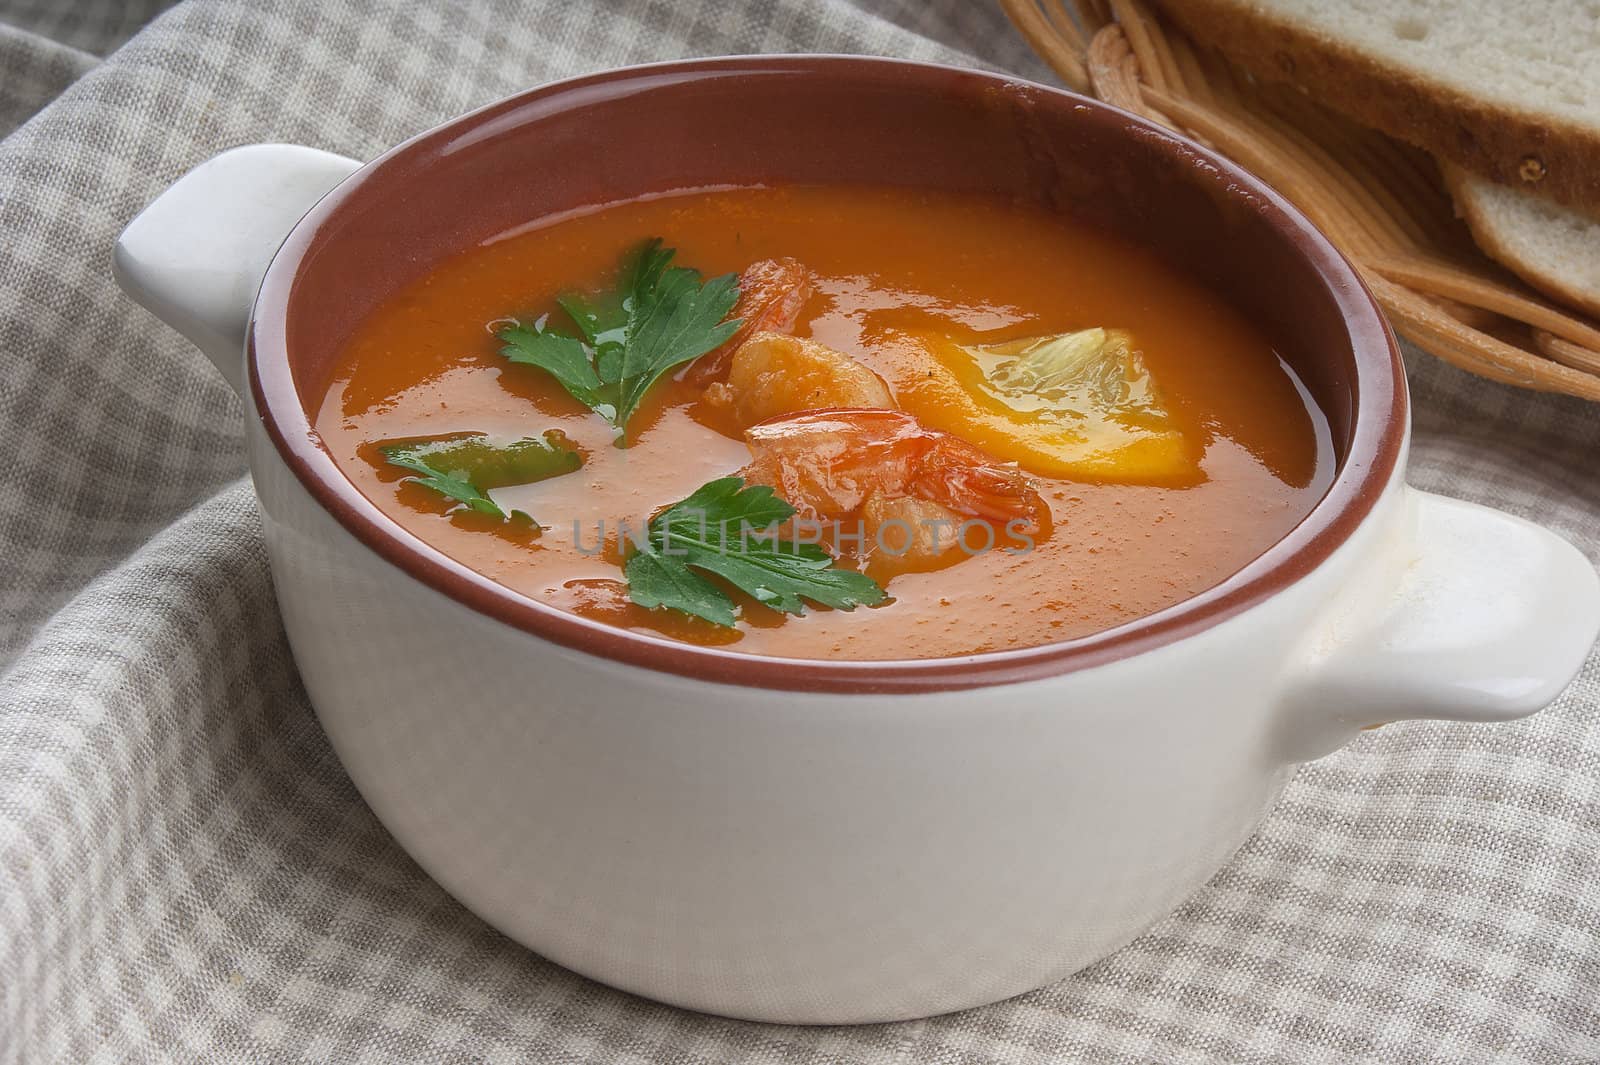 Tomato soup with shrimps by Angorius